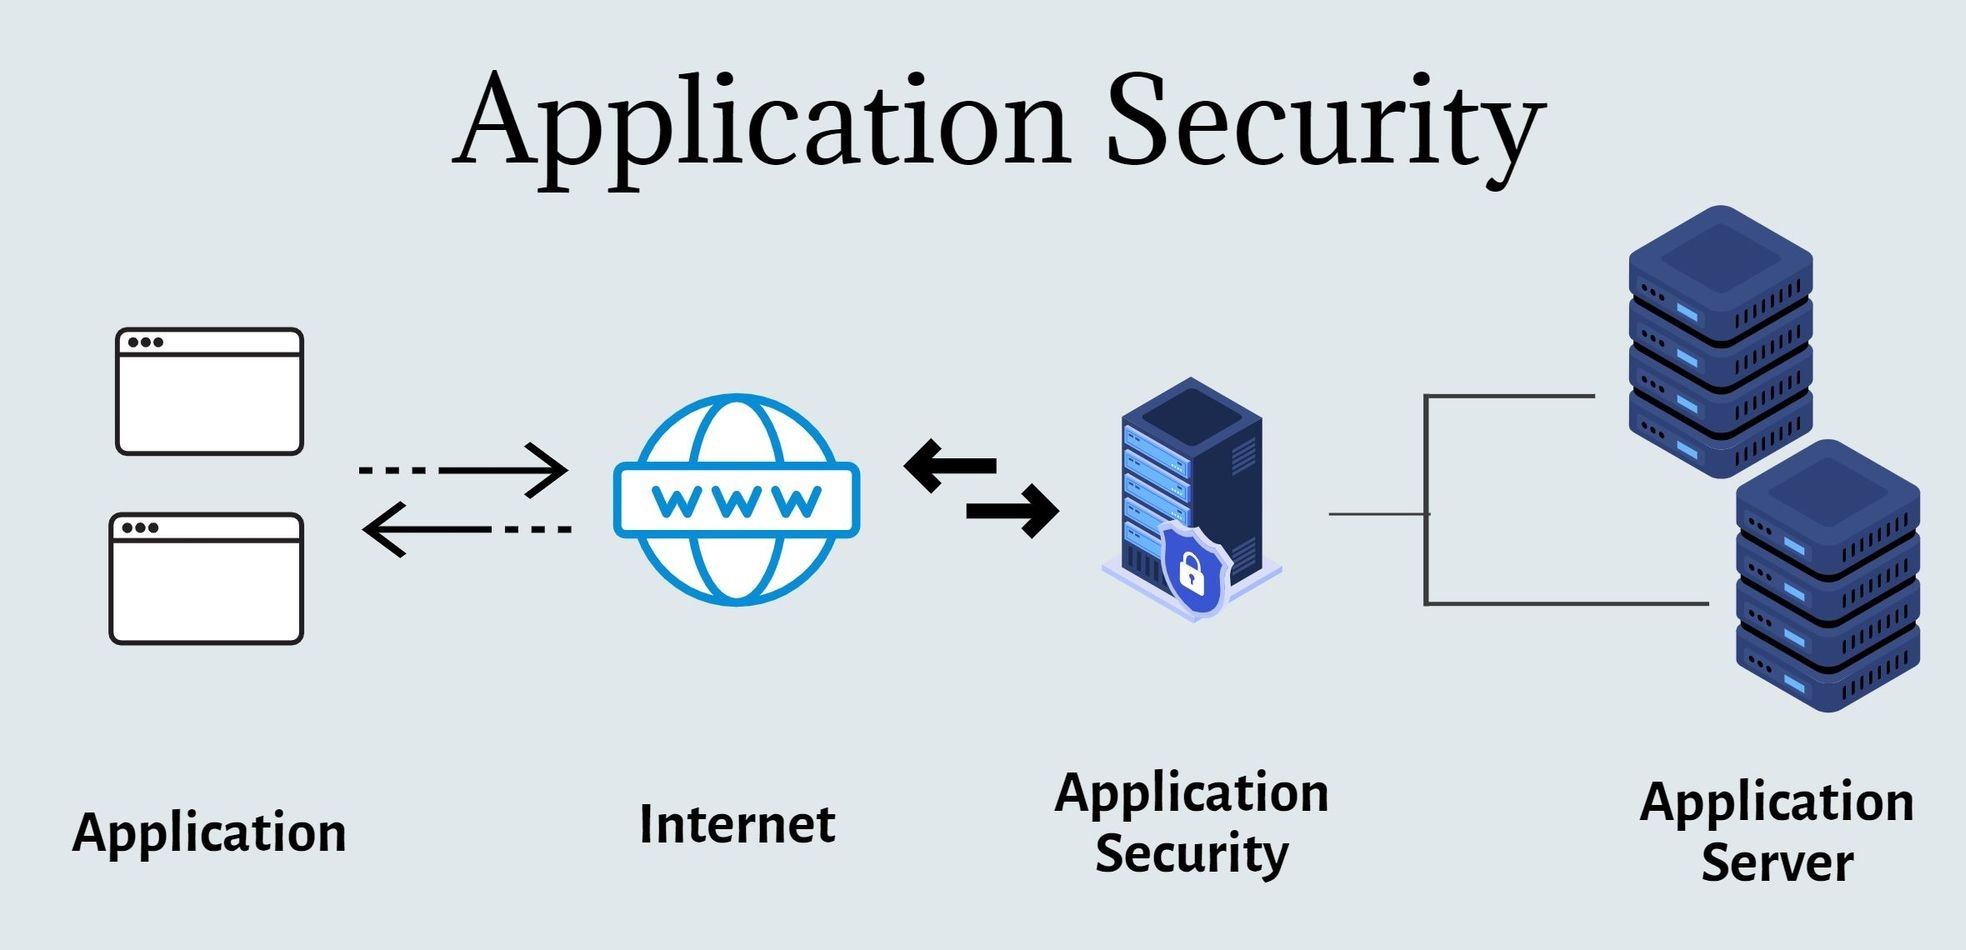 Ensures Application Security